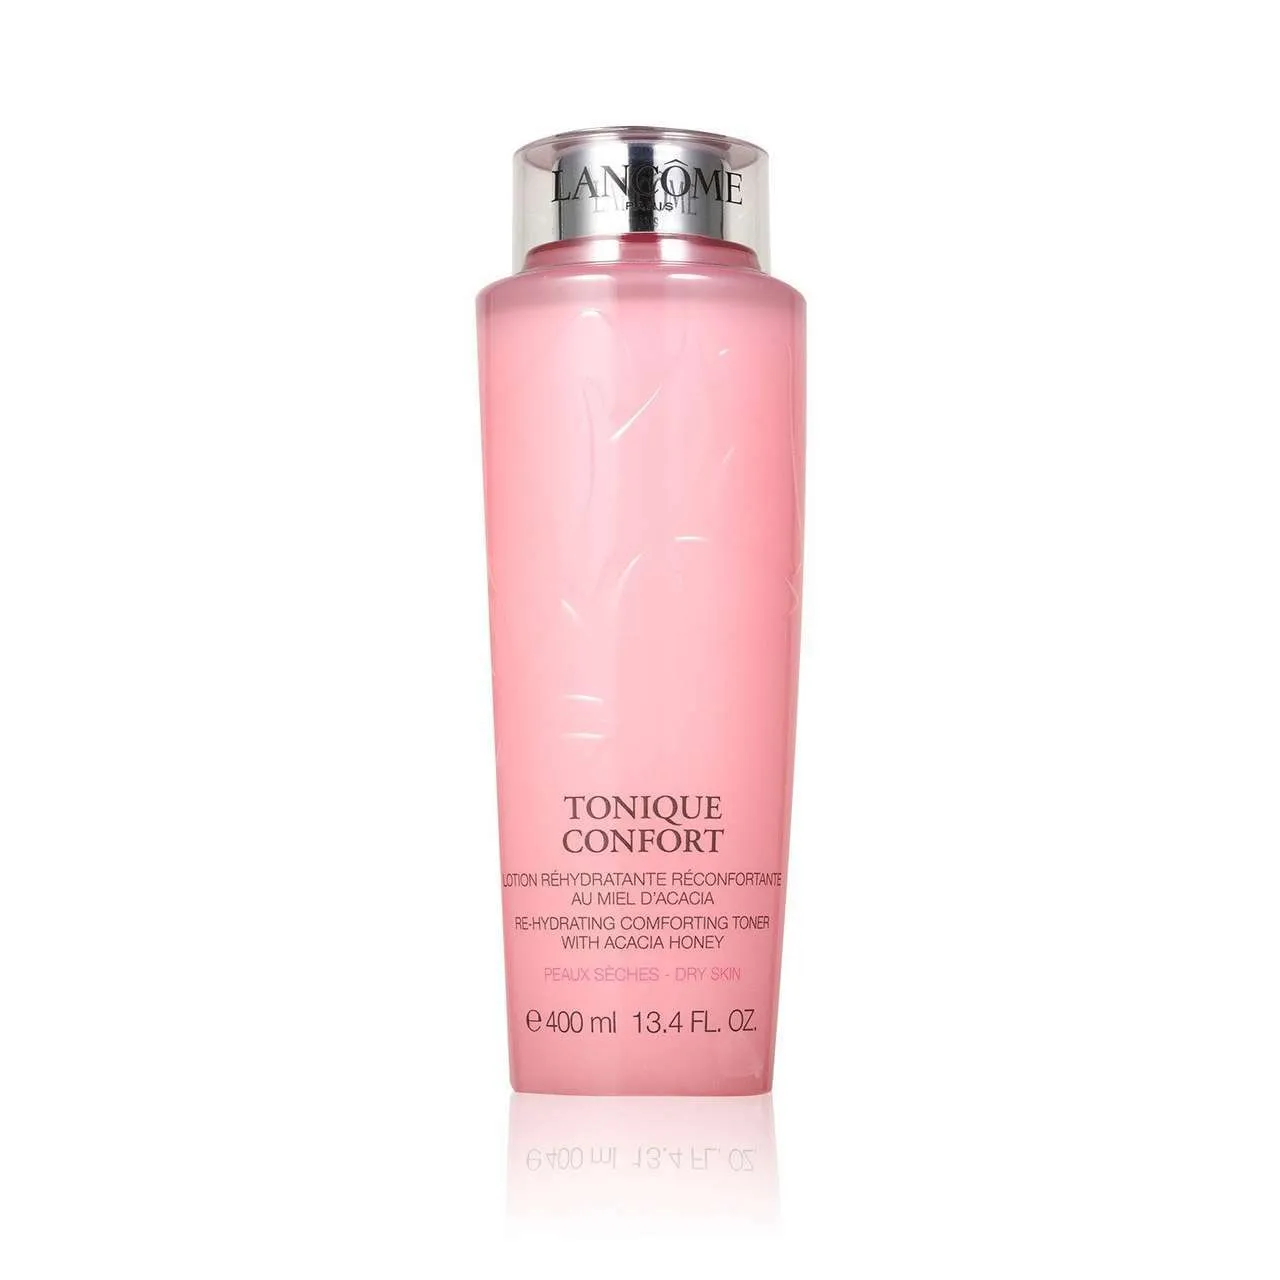 Comforting Rehydrating Toner by Lancome, the best French toner.